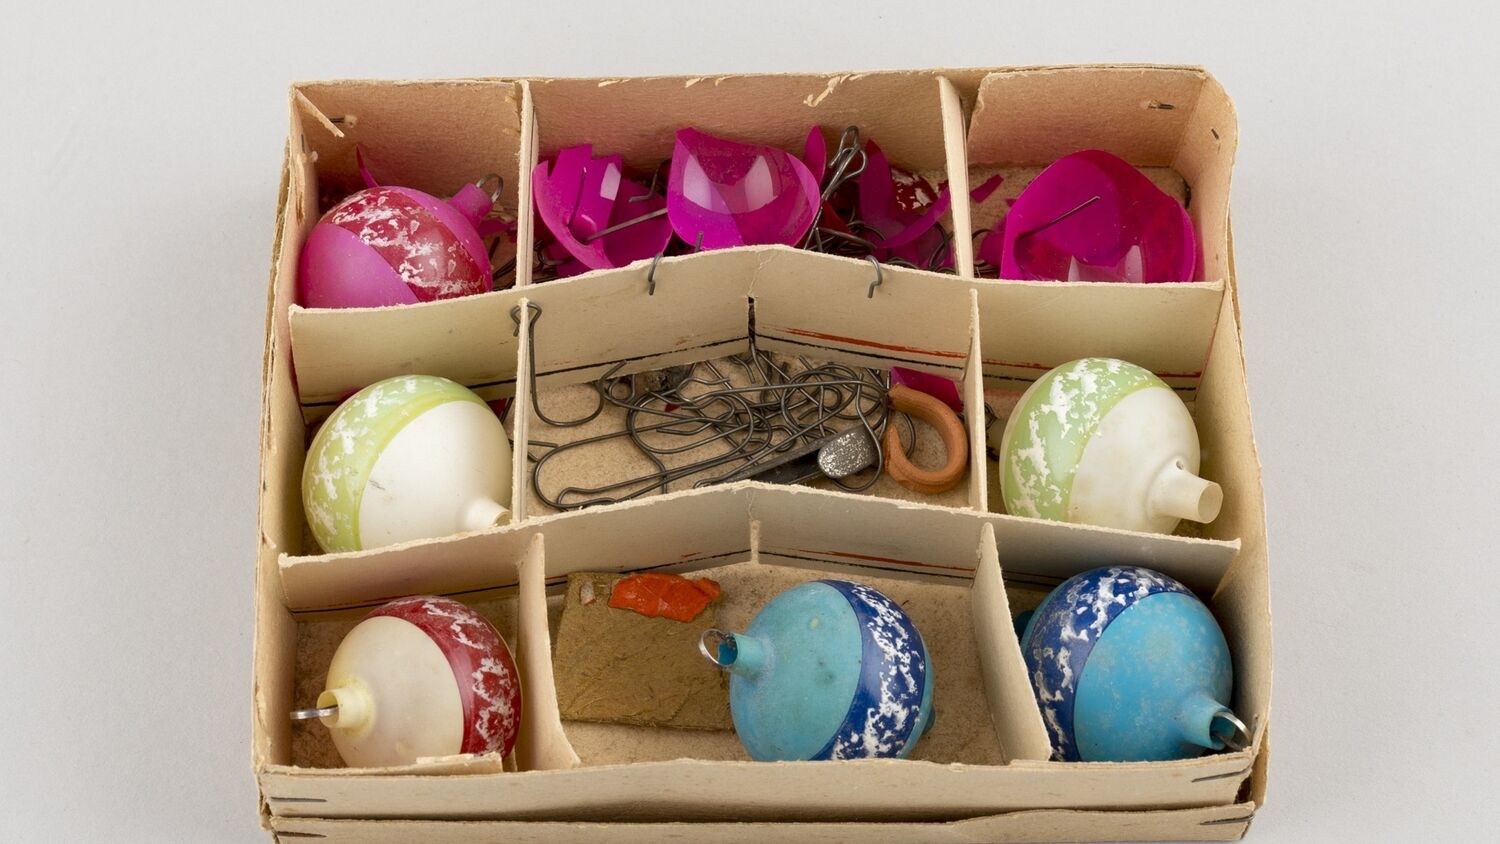 A brown cardboard box split into nine sections. In each of the section is a round Christmas bauble. Three are creamy white, three are hot pink and two are a bright duck-egg blue. Two of the pink baubles are shattered. The central section of the box is filled with metal pins.